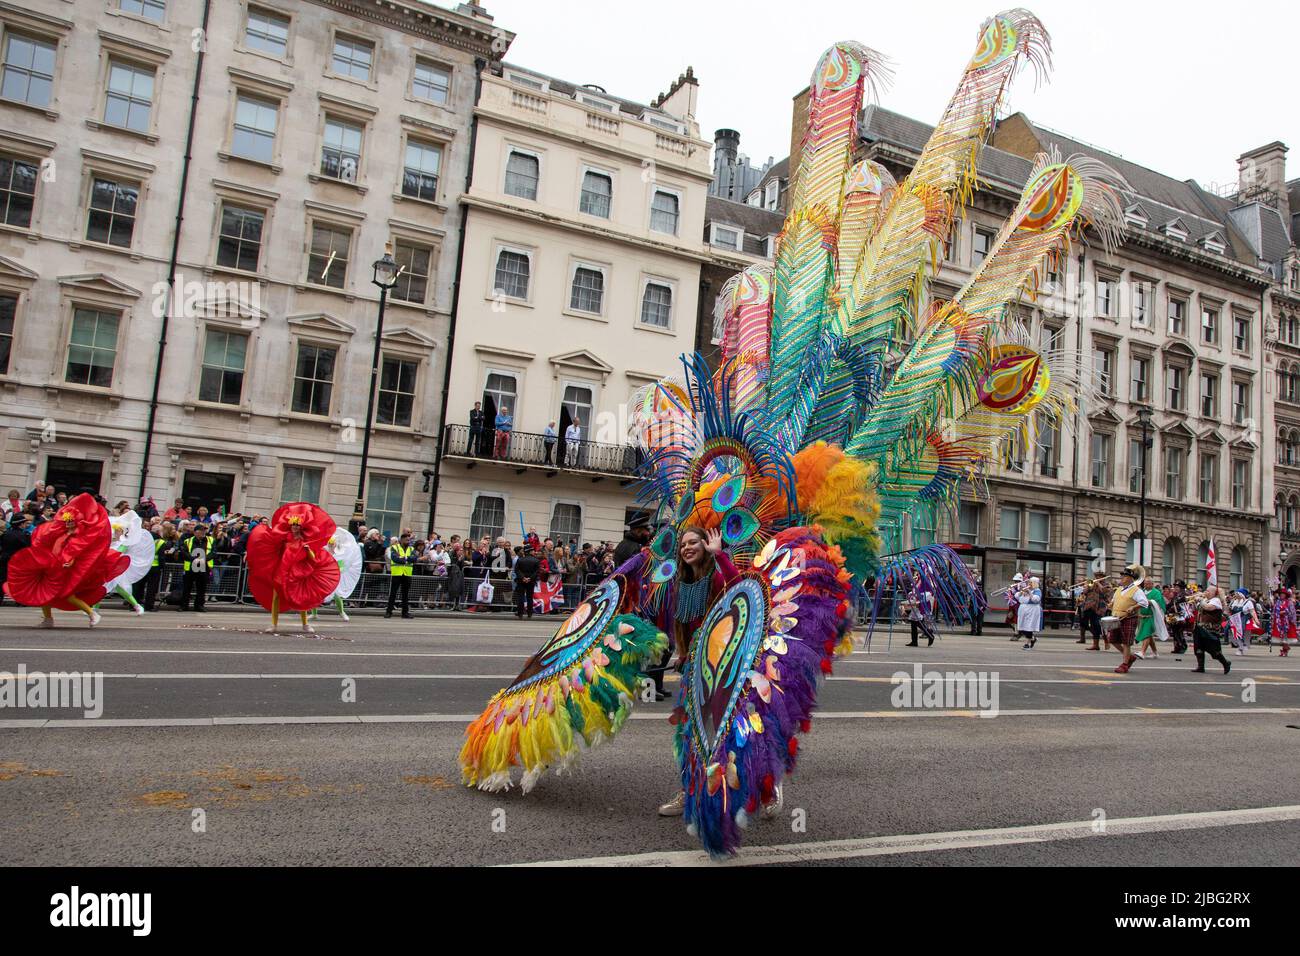 London, UK. 5th June 2022. A woman dressed as a peacock was part of a 7-thousand-people strong Platinum Jubilee Pageant held in central London to mark her Majesty's 70 years on the throne. The colourful parade made its way along Whitehall, the Mall and past Buckingham Palace and was described by many as a once in a lifetime event. Credit: Kiki Streitberger / Alamy Live News Stock Photo